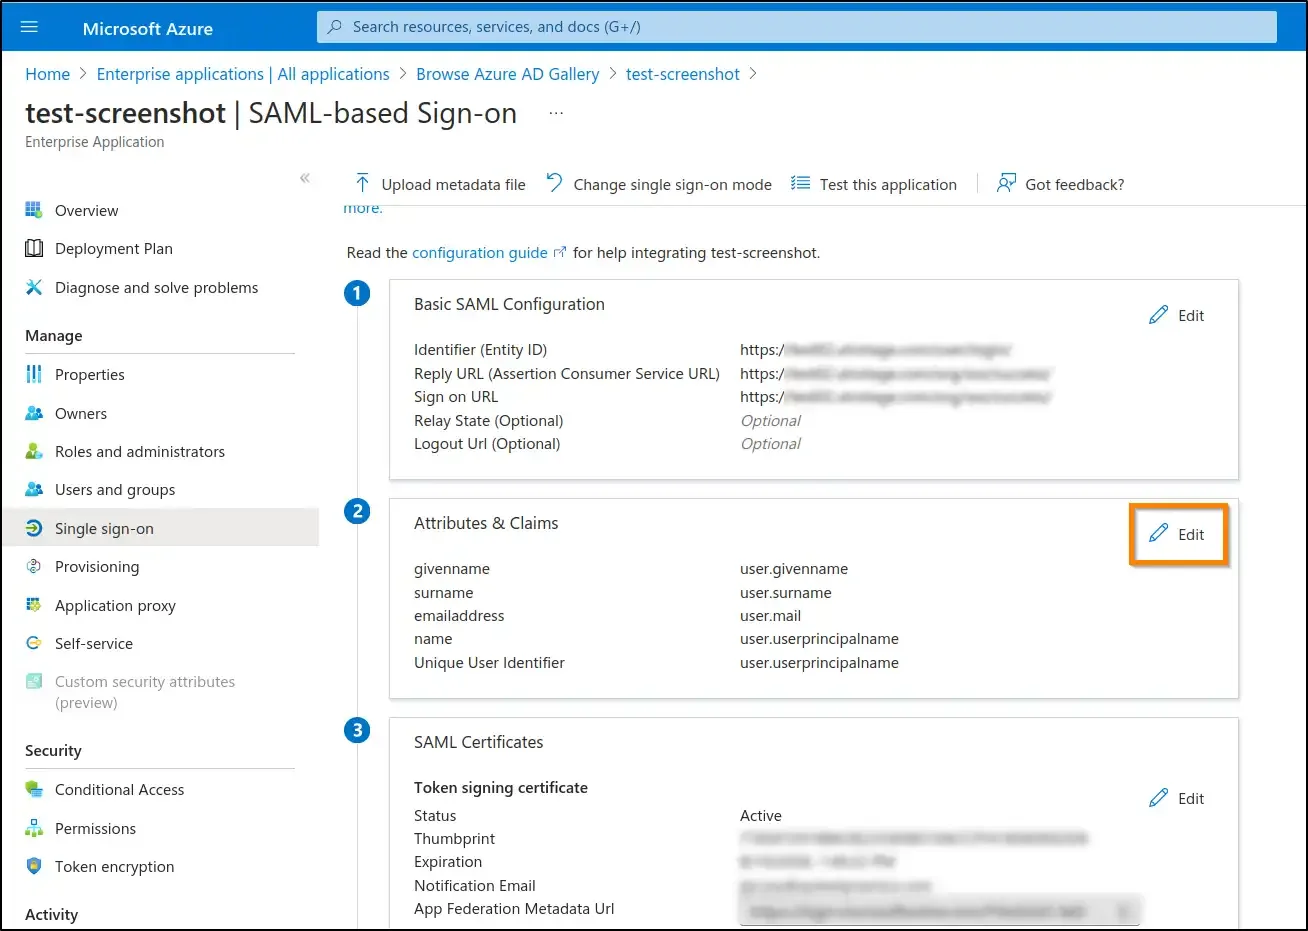 How to enable SSO and use Azure AD as identity provider edit user attributes and claims